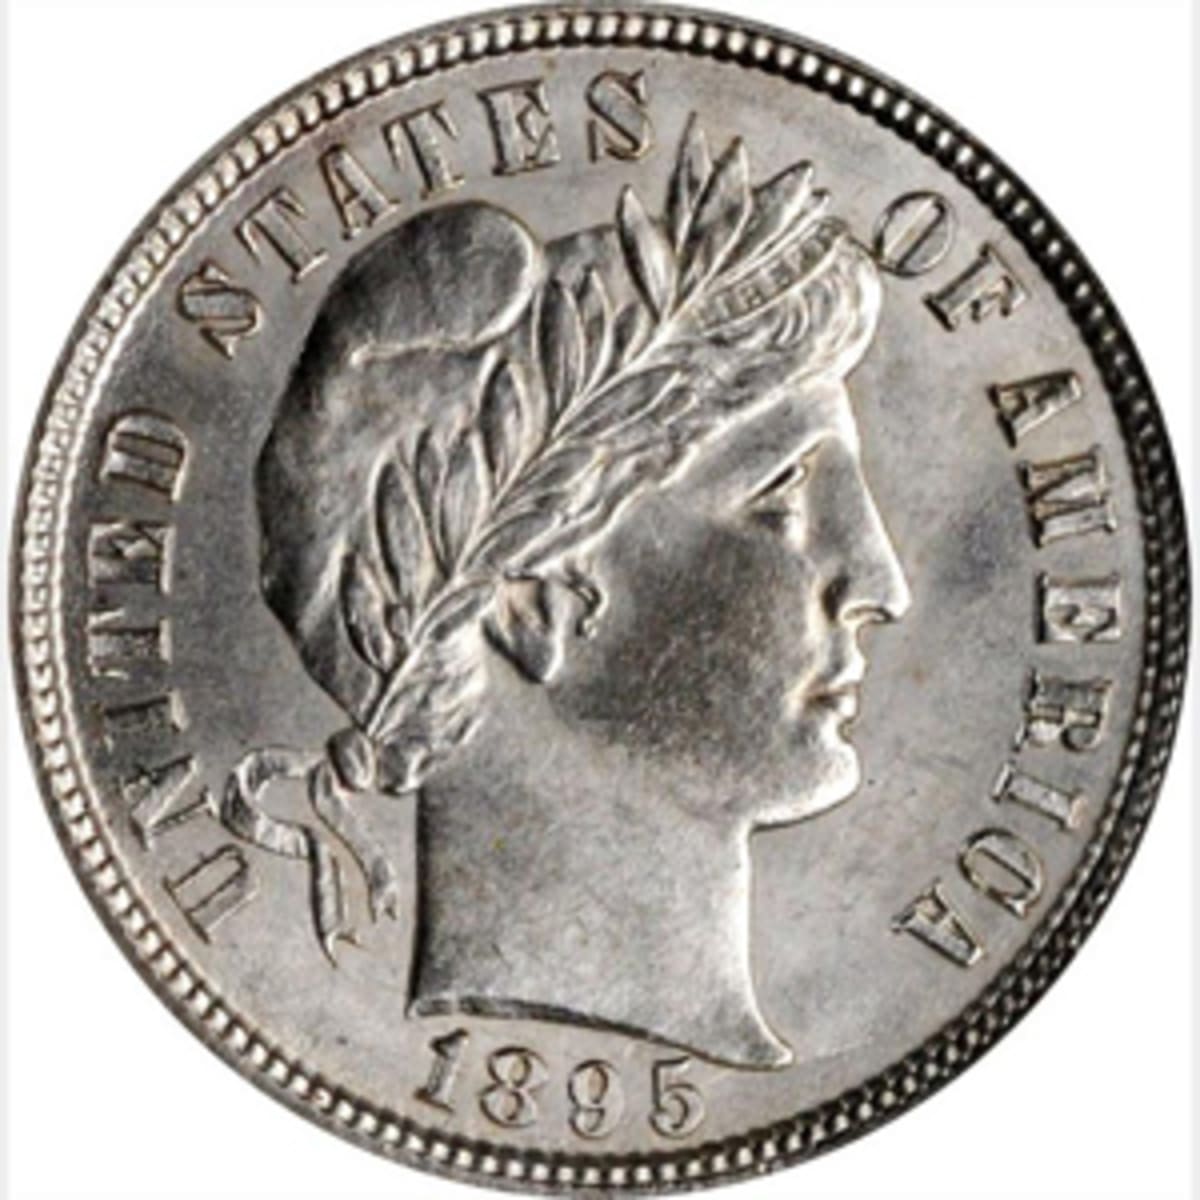 Rare Coins 101 Lists US Coins Best Poised for Strong Value Increases.